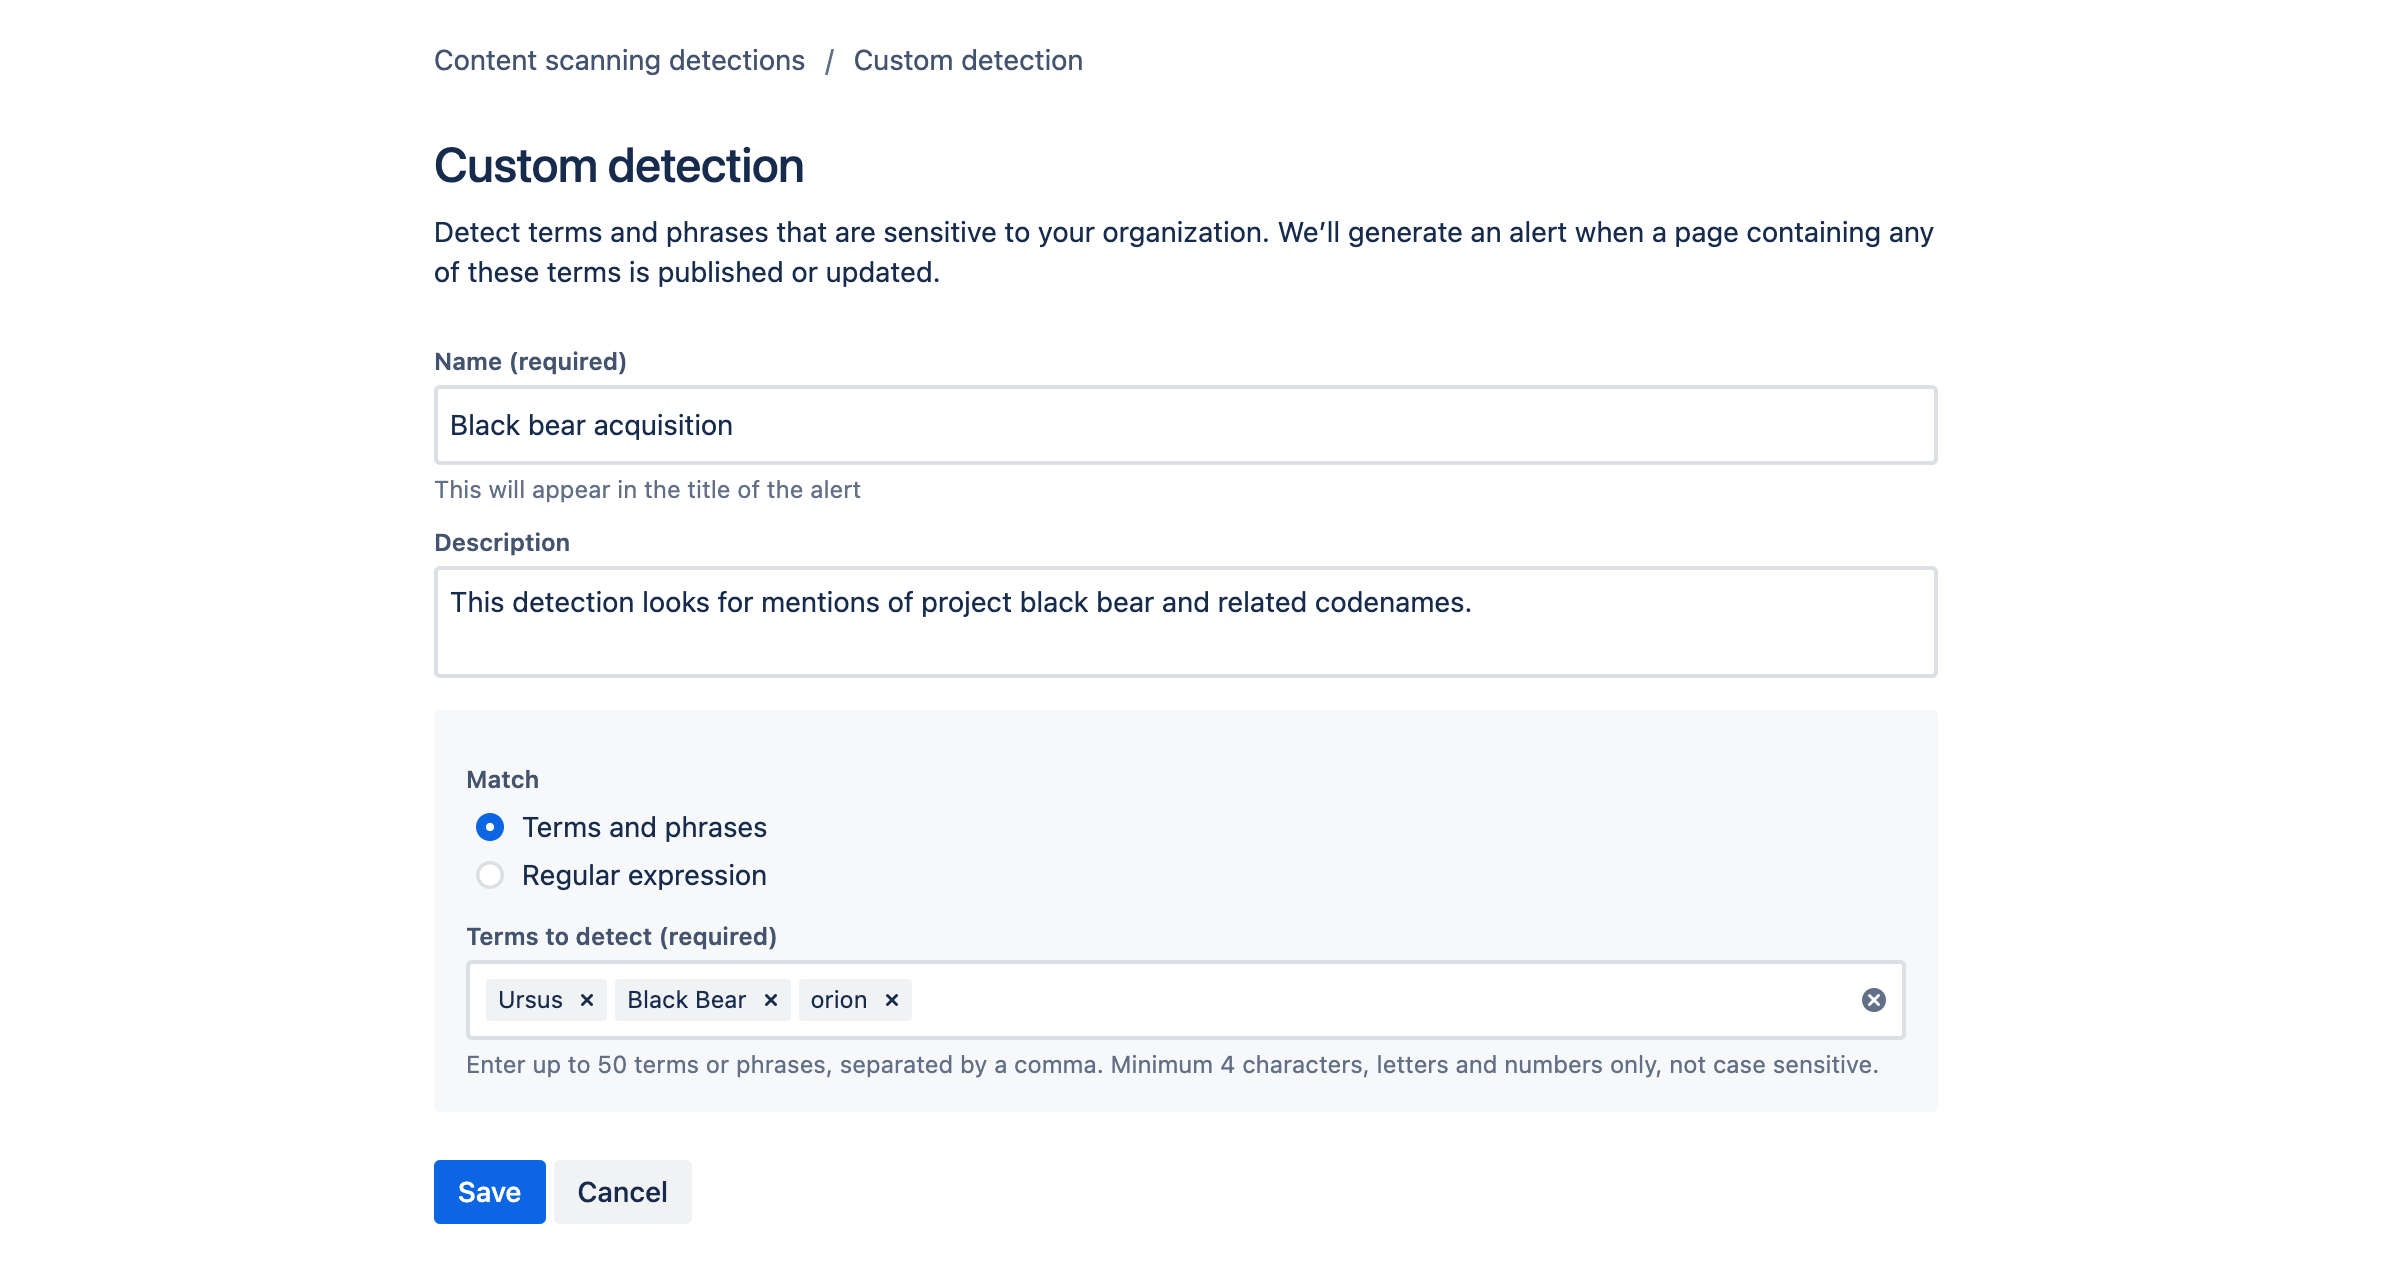 Custom detection form showing name, description, and terms to detect fields. 